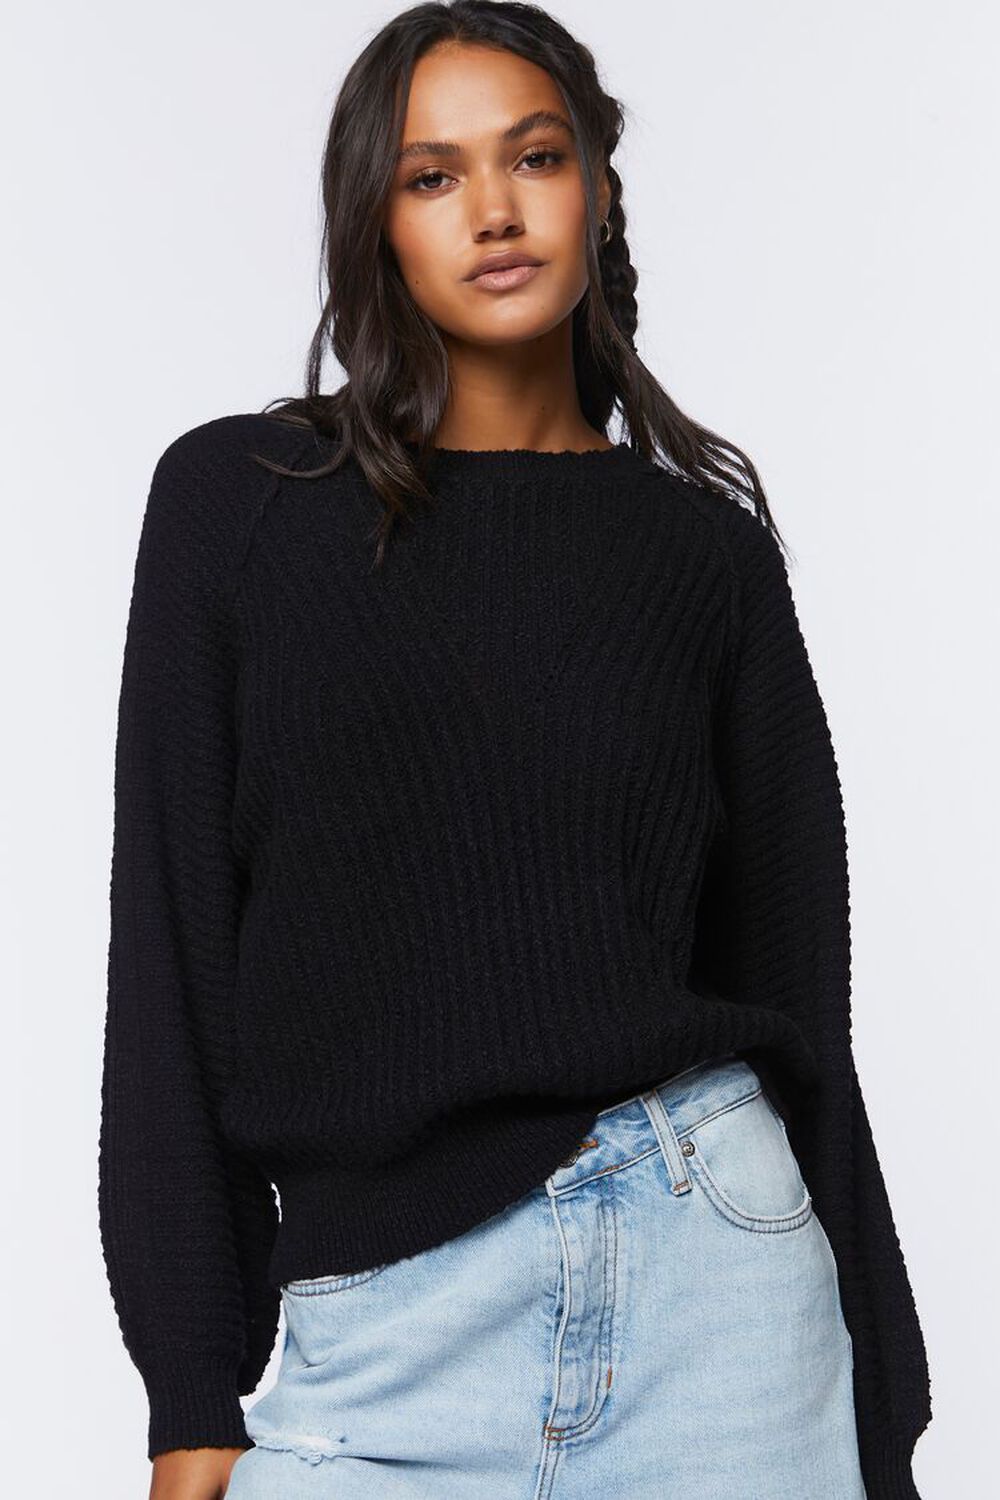 BLACK Relaxed-Fit Raglan Sweater, image 1